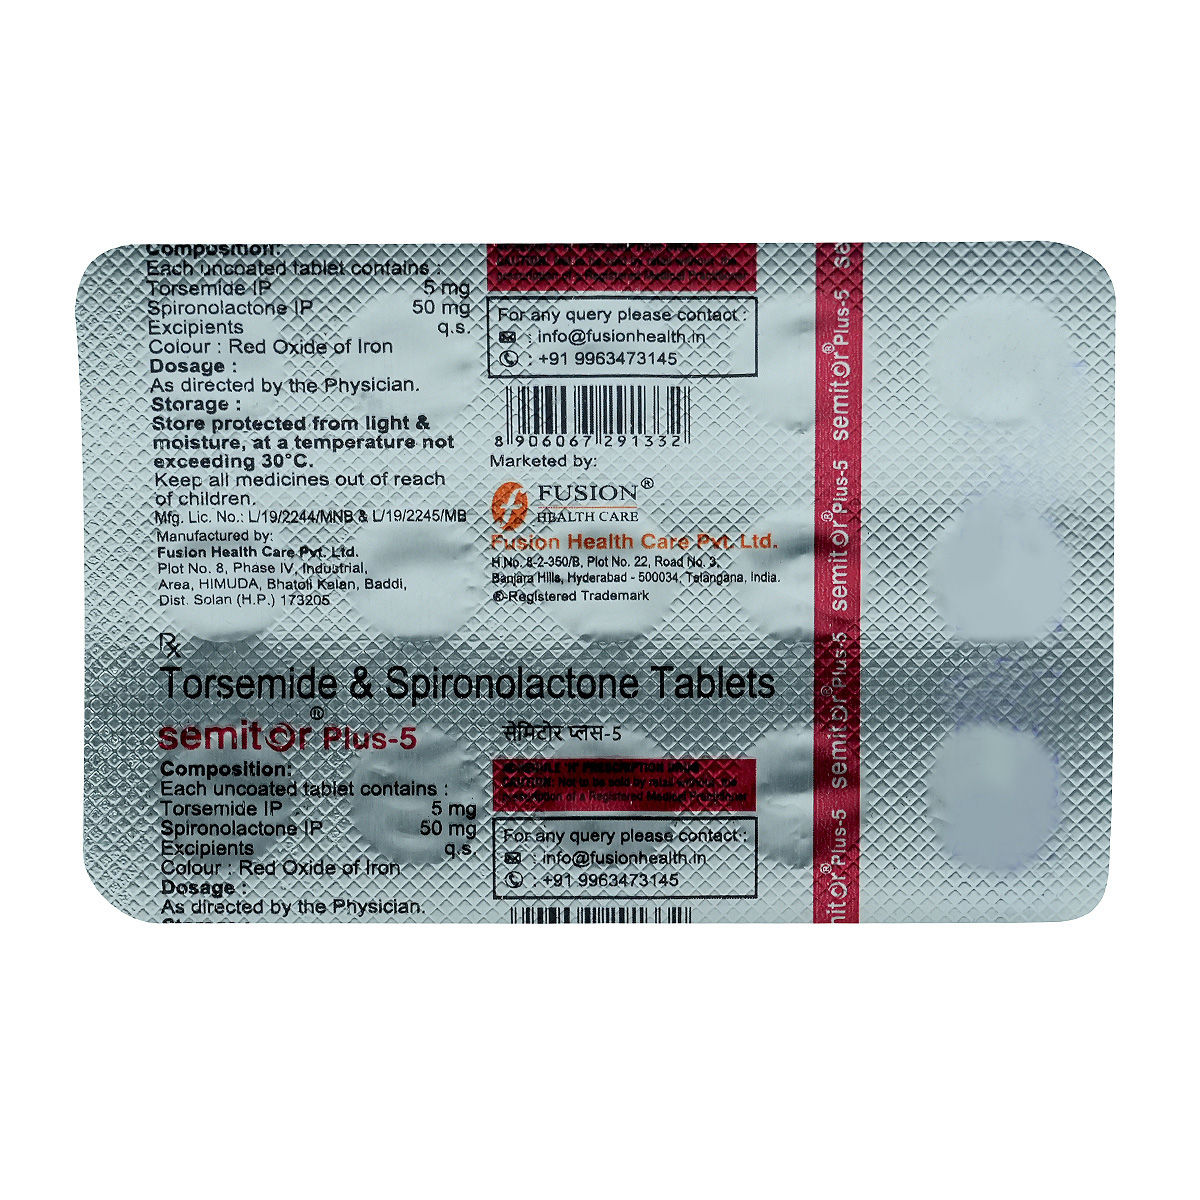 Semitor Plus-5 Tablet 15's, Pack of 15 TABLETS